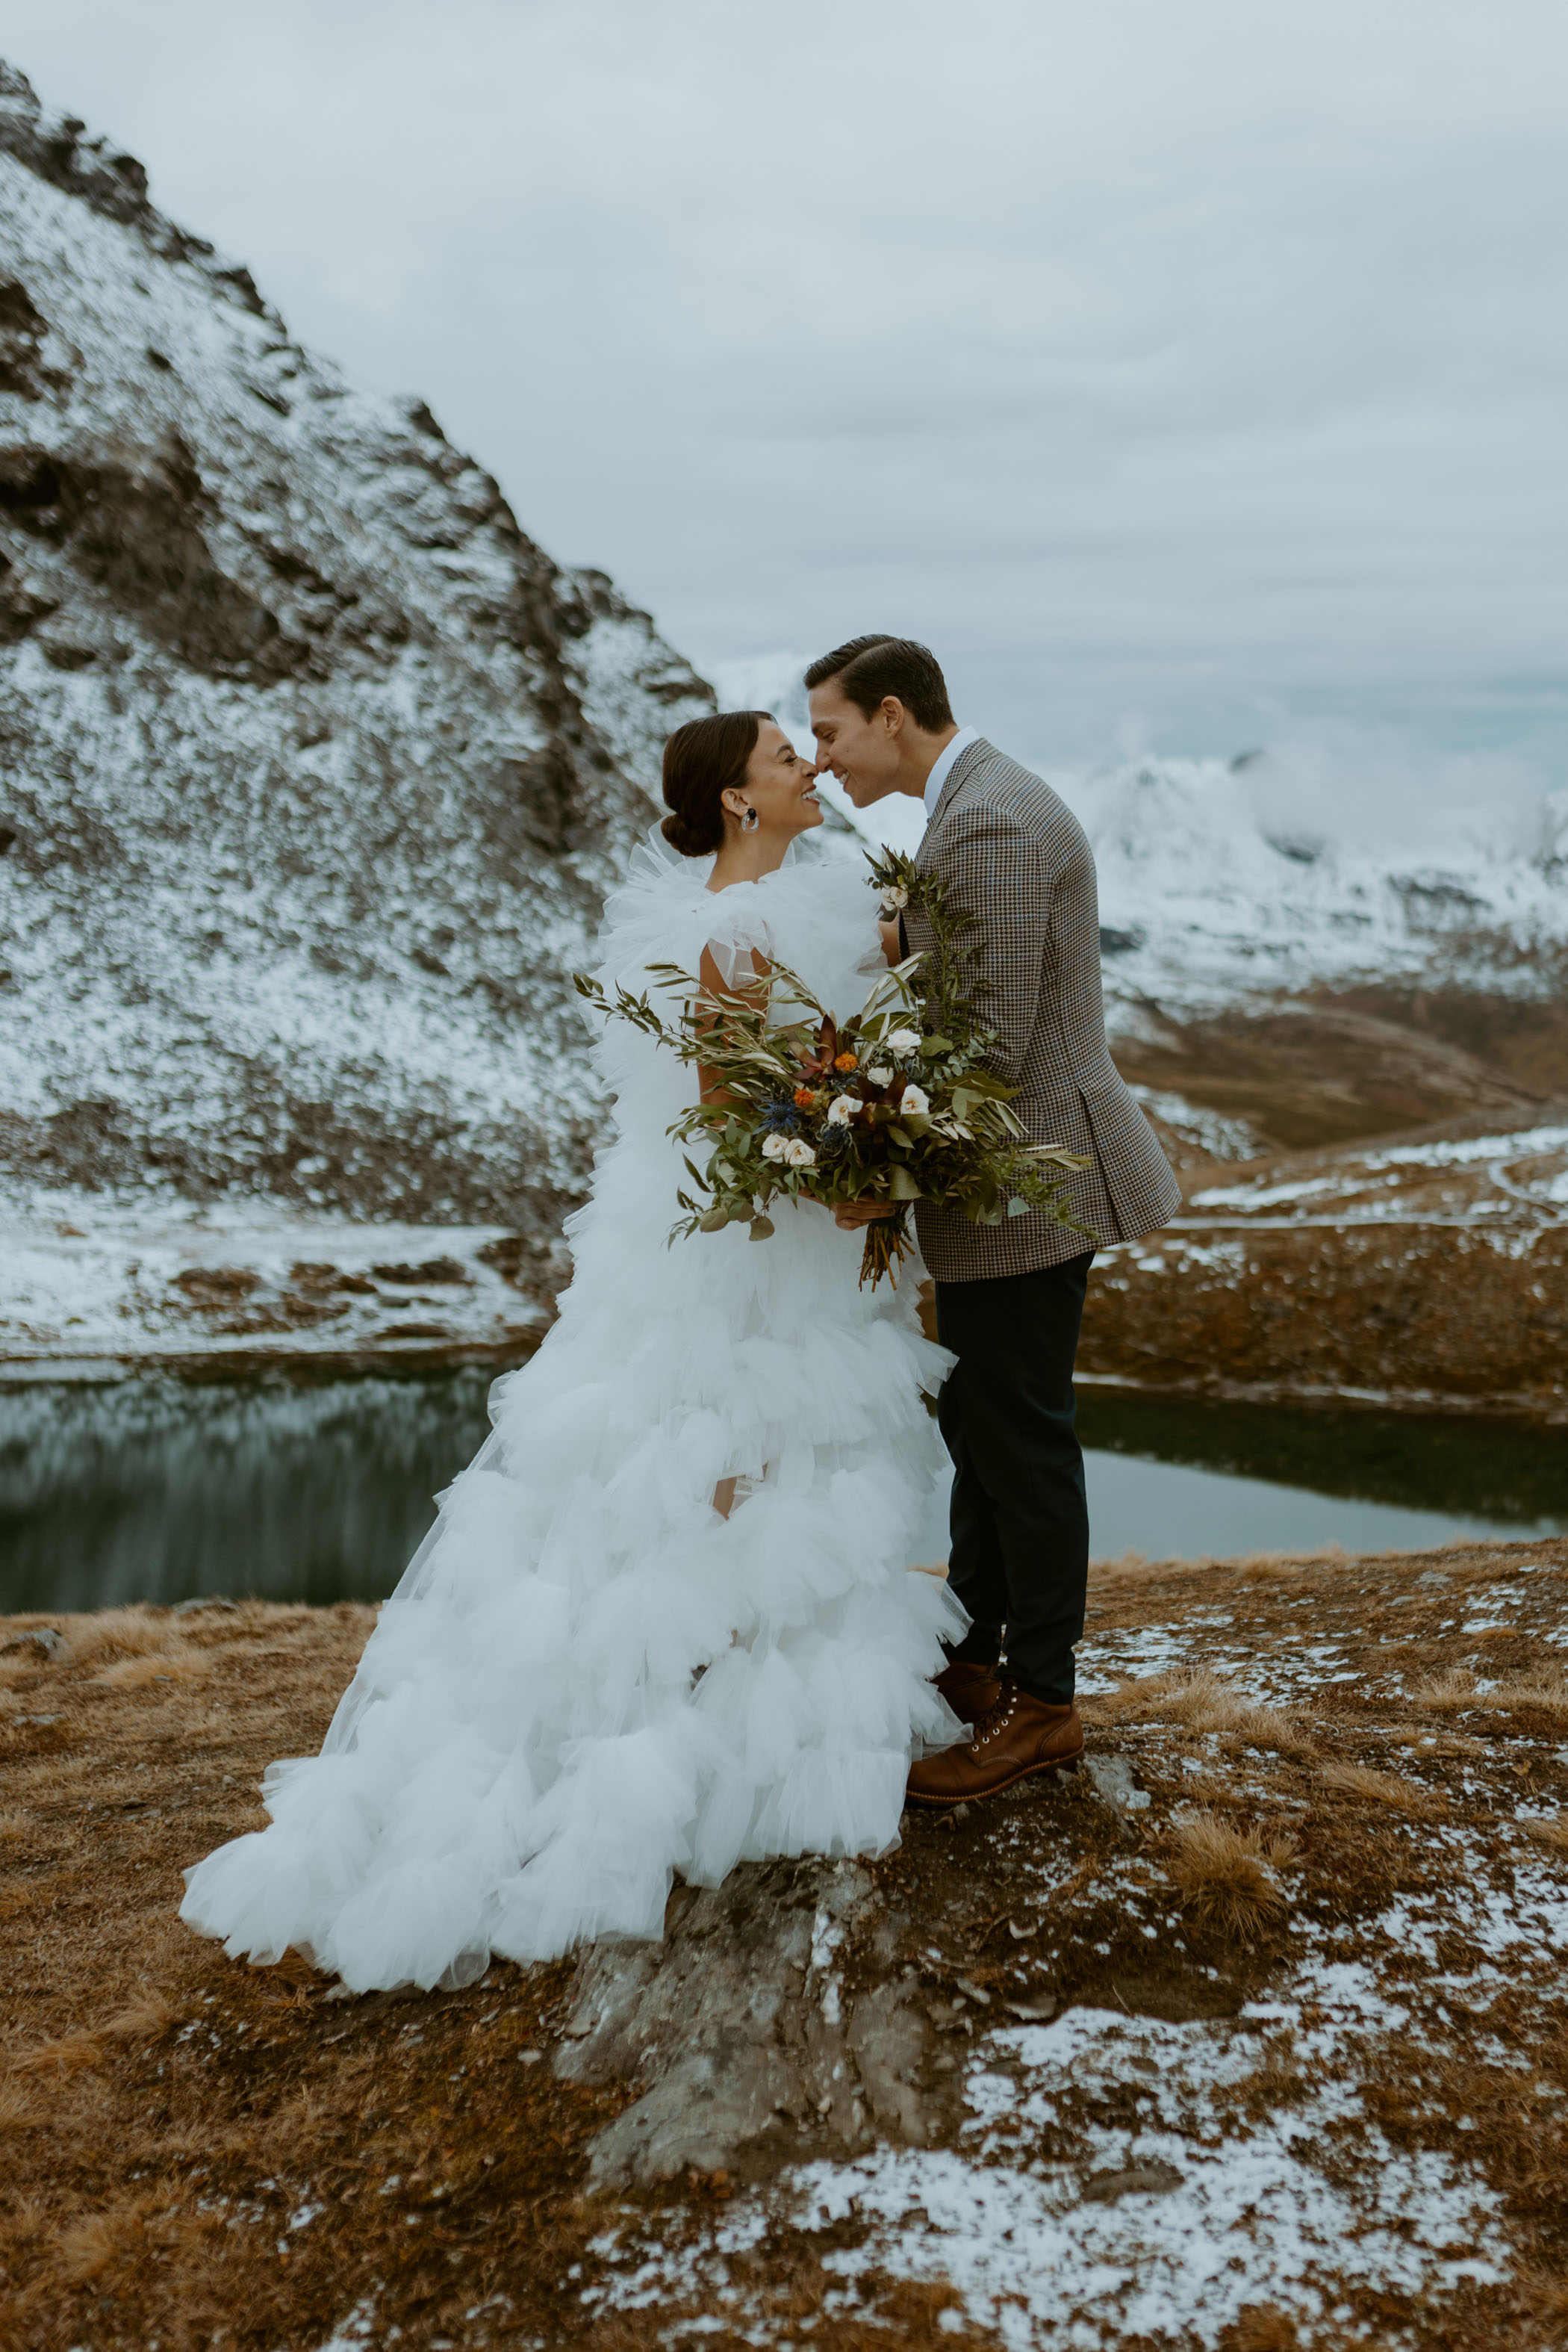 Skip the Fuss of Planning a Wedding and Elope on a Glacier Instead